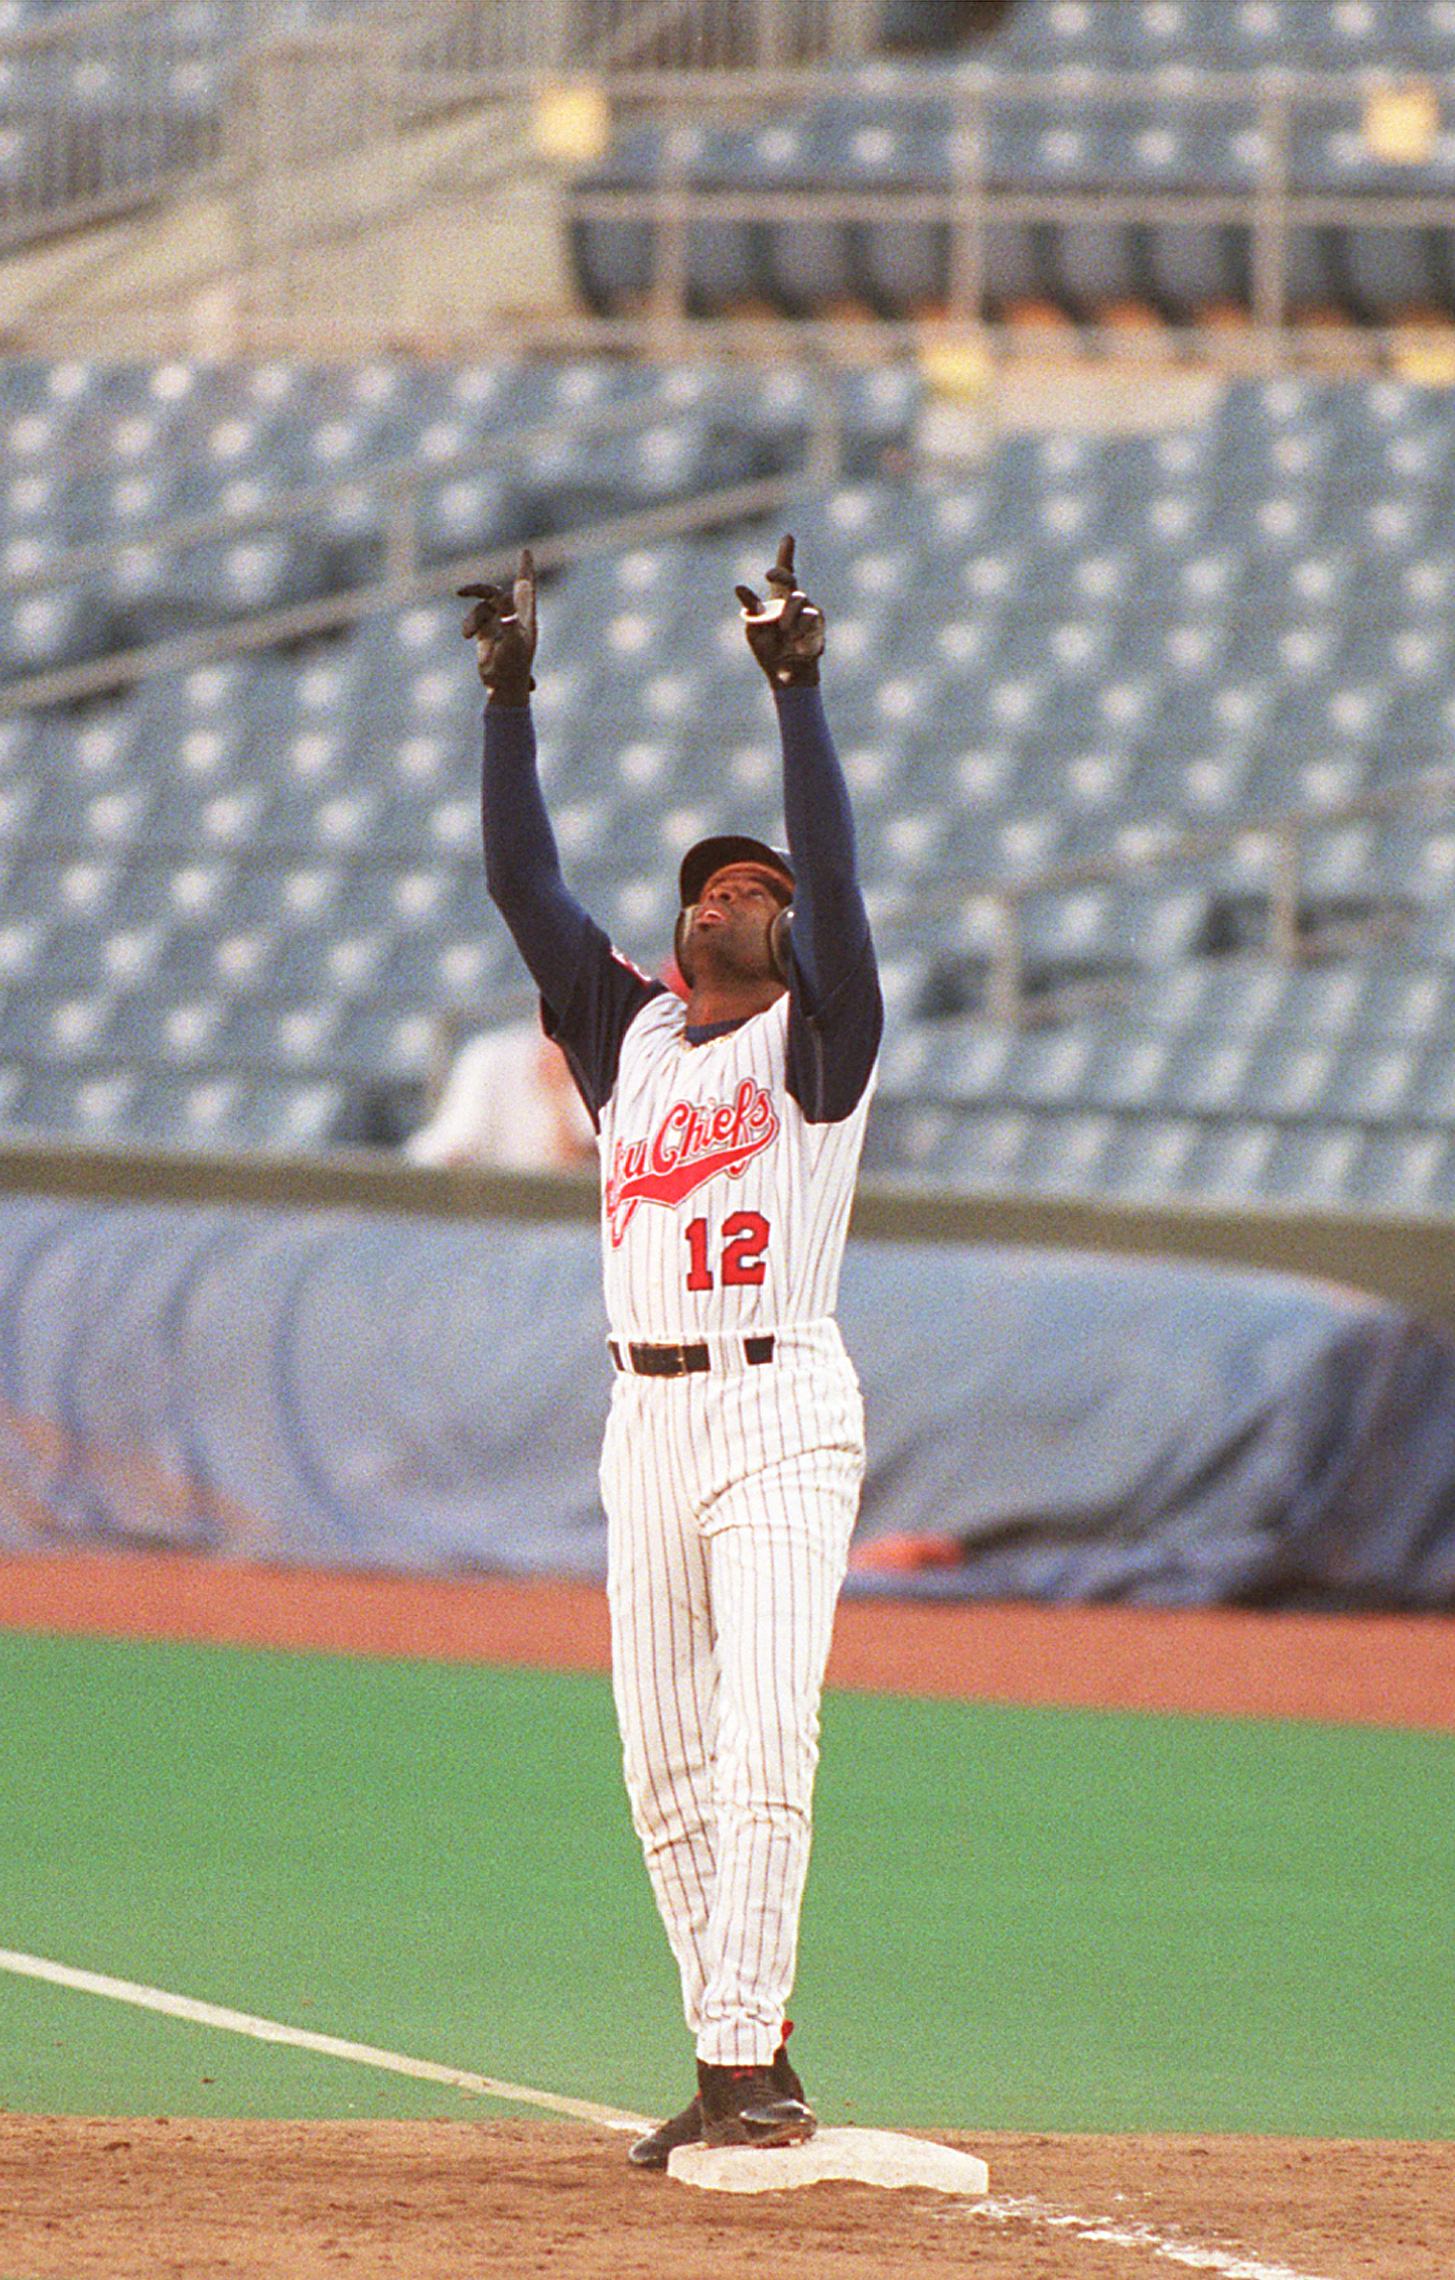 May 1, 2001: Deion Sanders puts on a show in his return after three seasons  away from baseball. In his first game since 1997, Reds outfielder Deion, By Blacks in Baseball